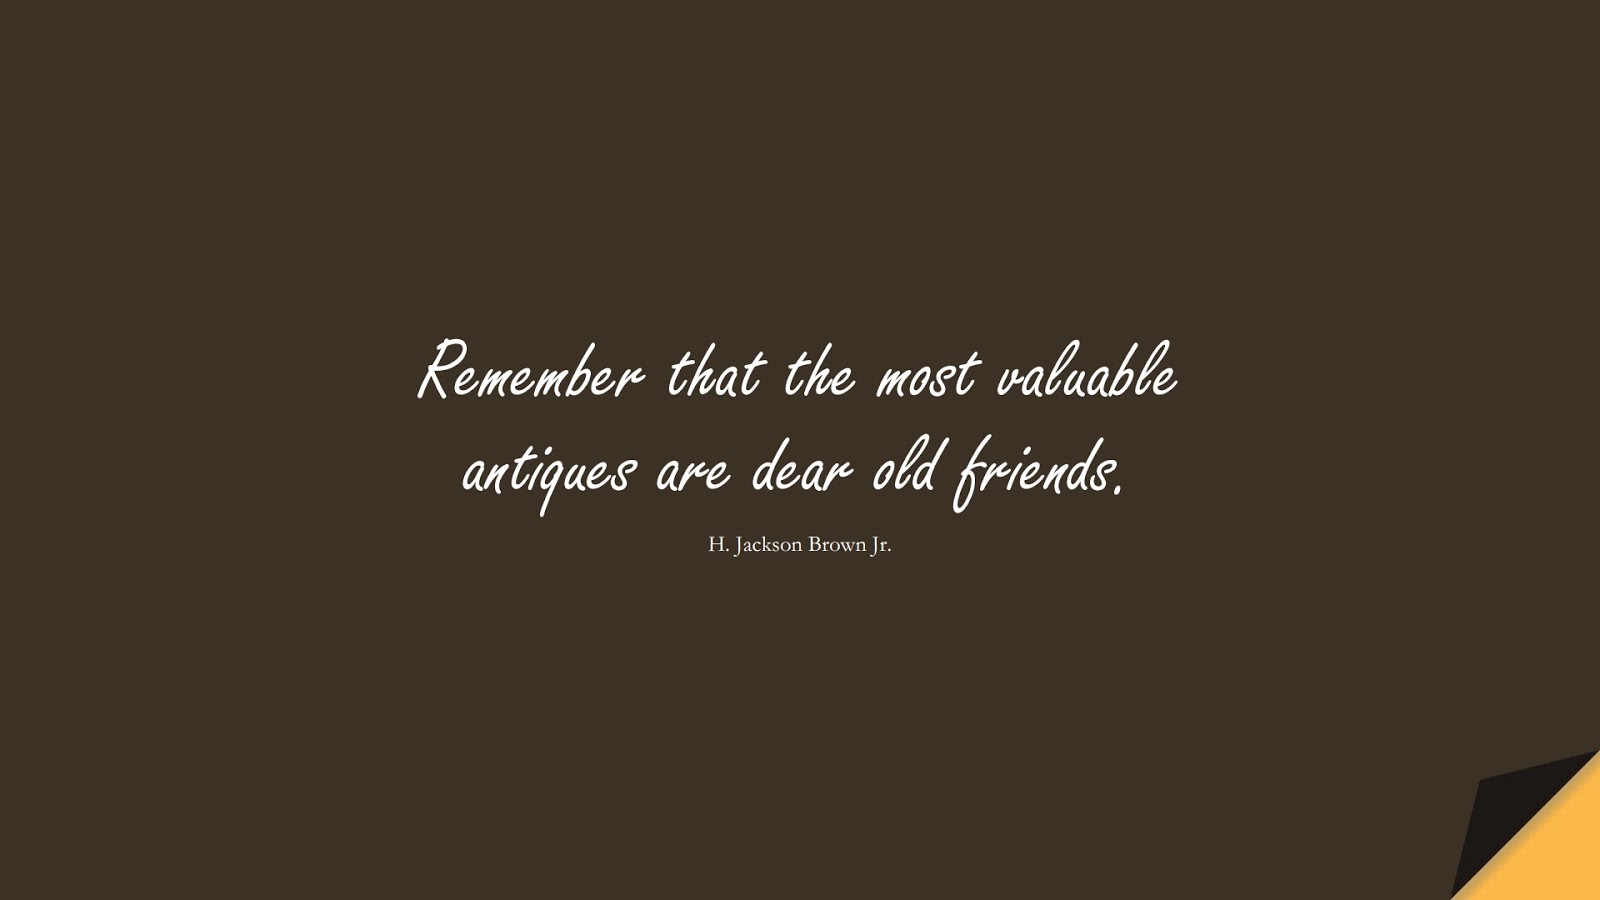 Remember that the most valuable antiques are dear old friends. (H. Jackson Brown Jr.);  #FriendshipQuotes